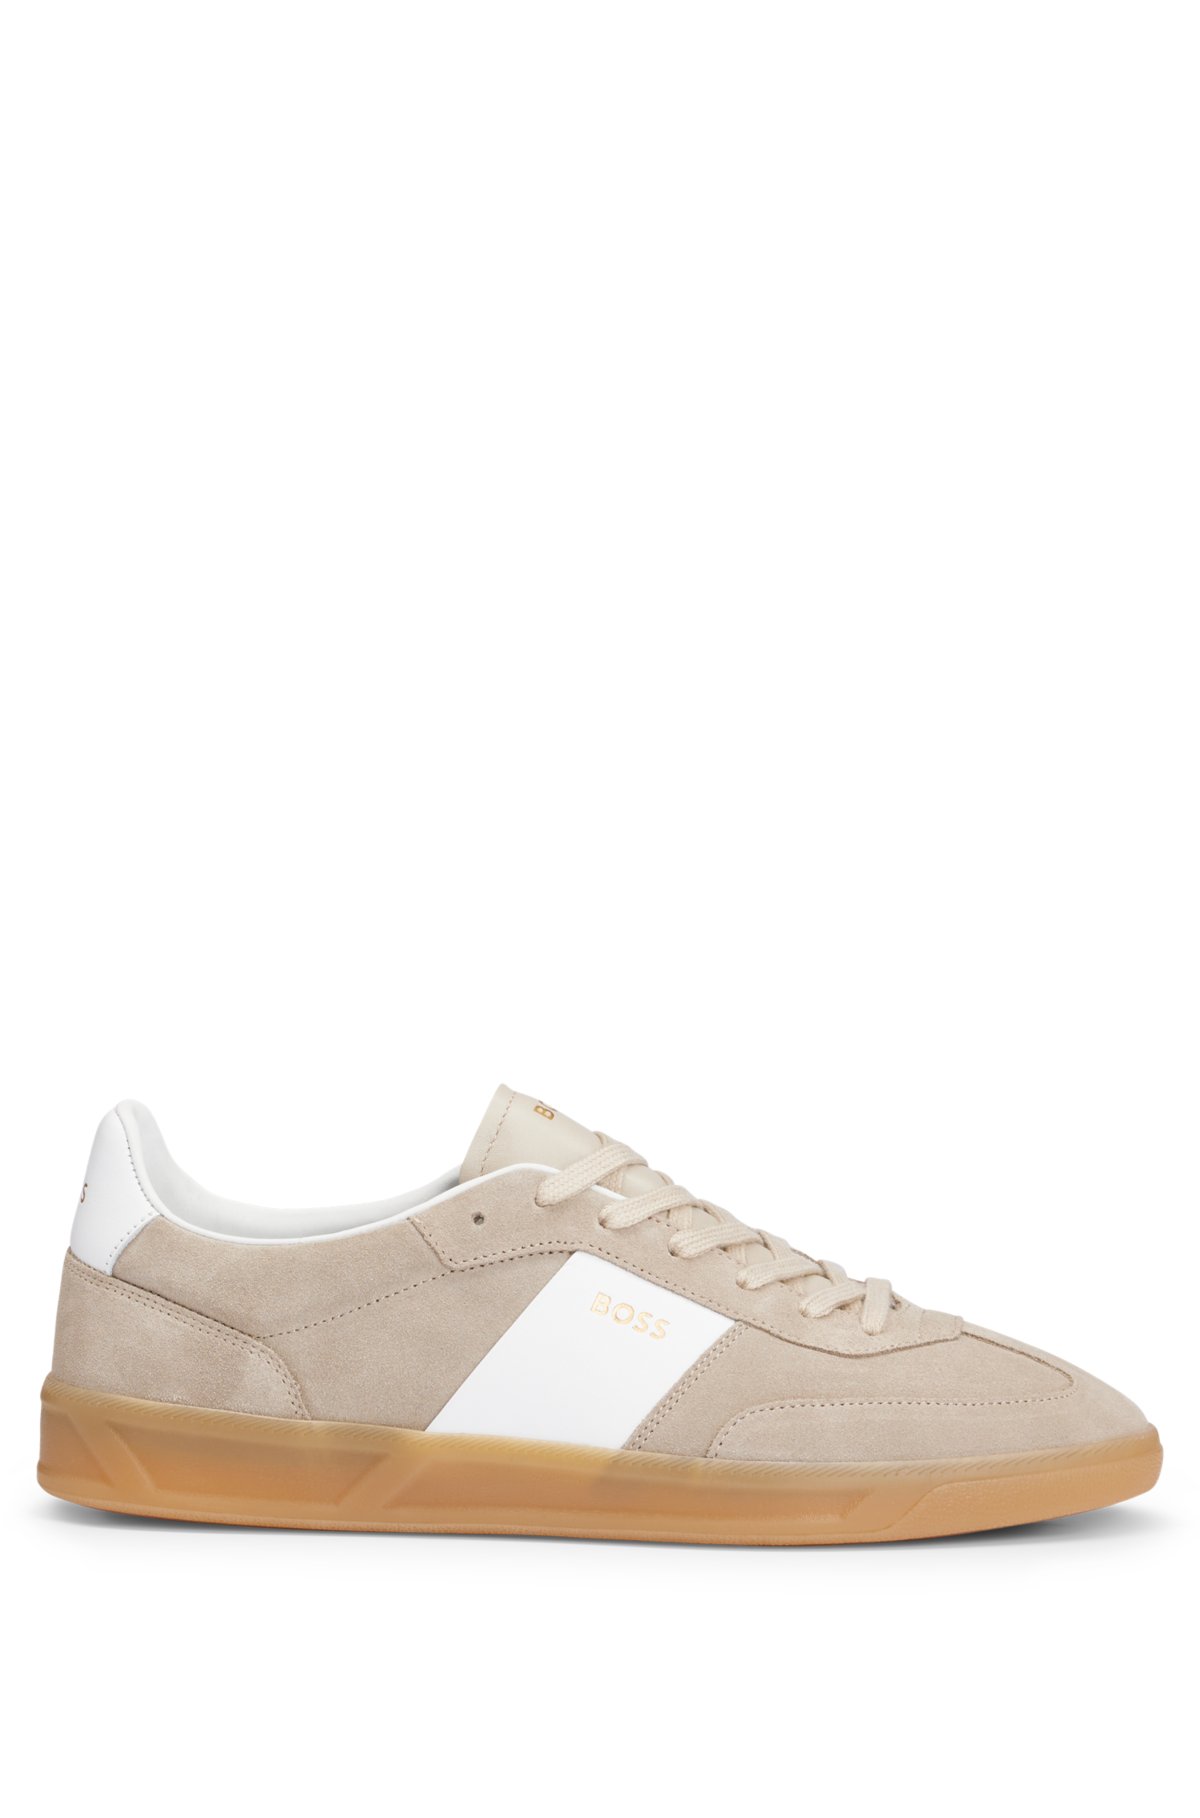 Suede-leather lace-up trainers with branding, Beige